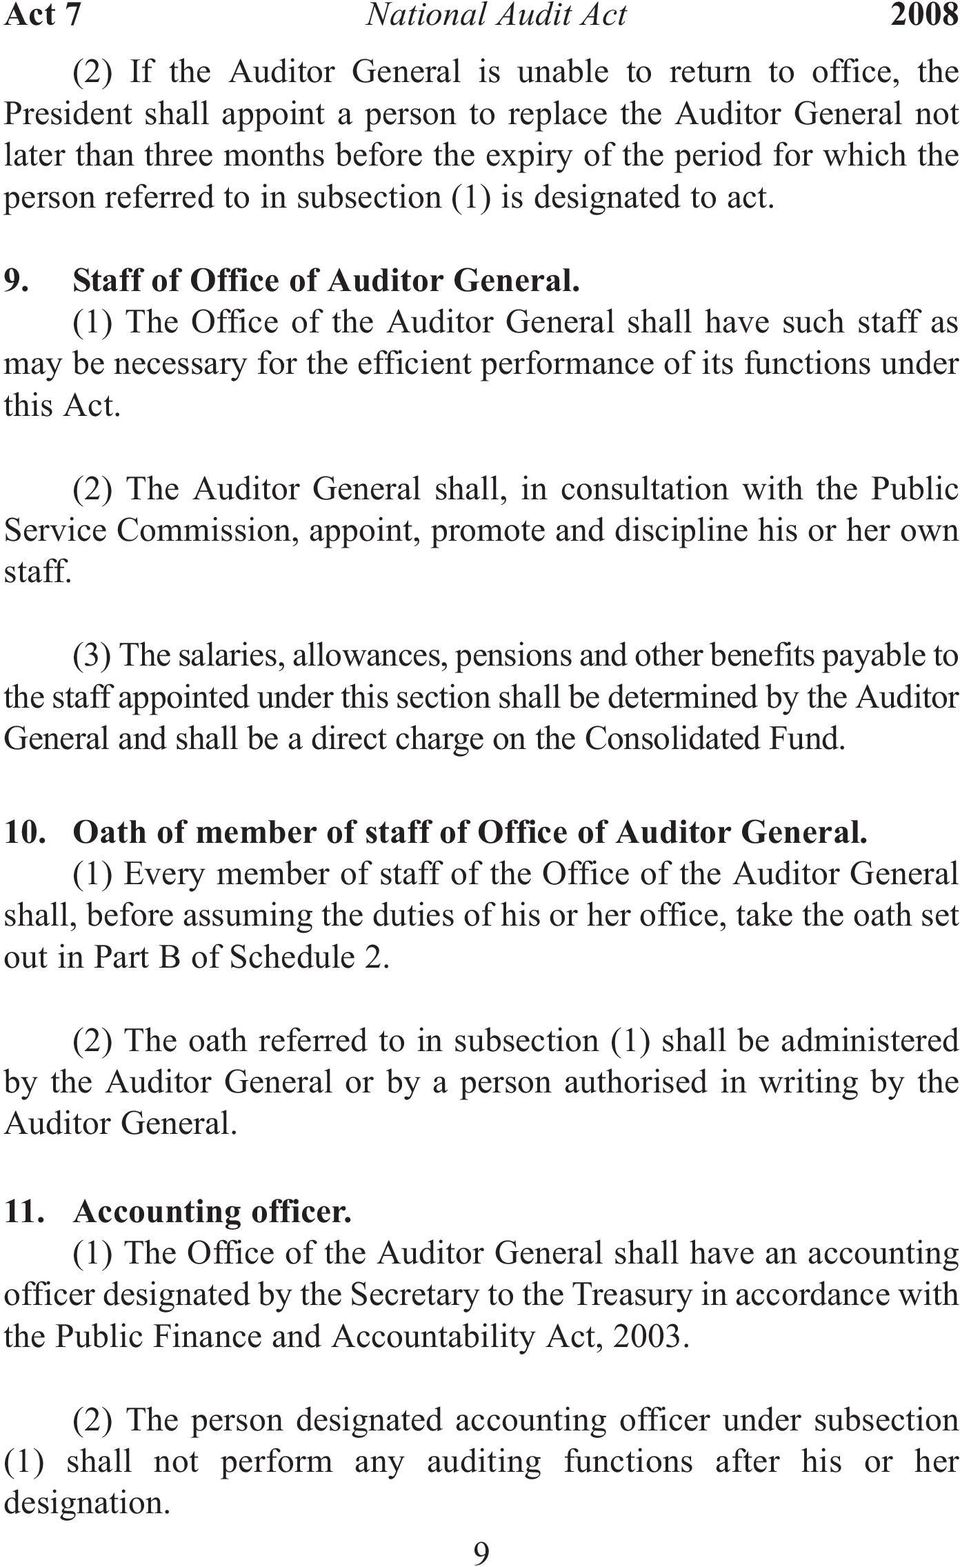 (1) The Office of the Auditor General shall have such staff as may be necessary for the efficient performance of its functions under this Act.